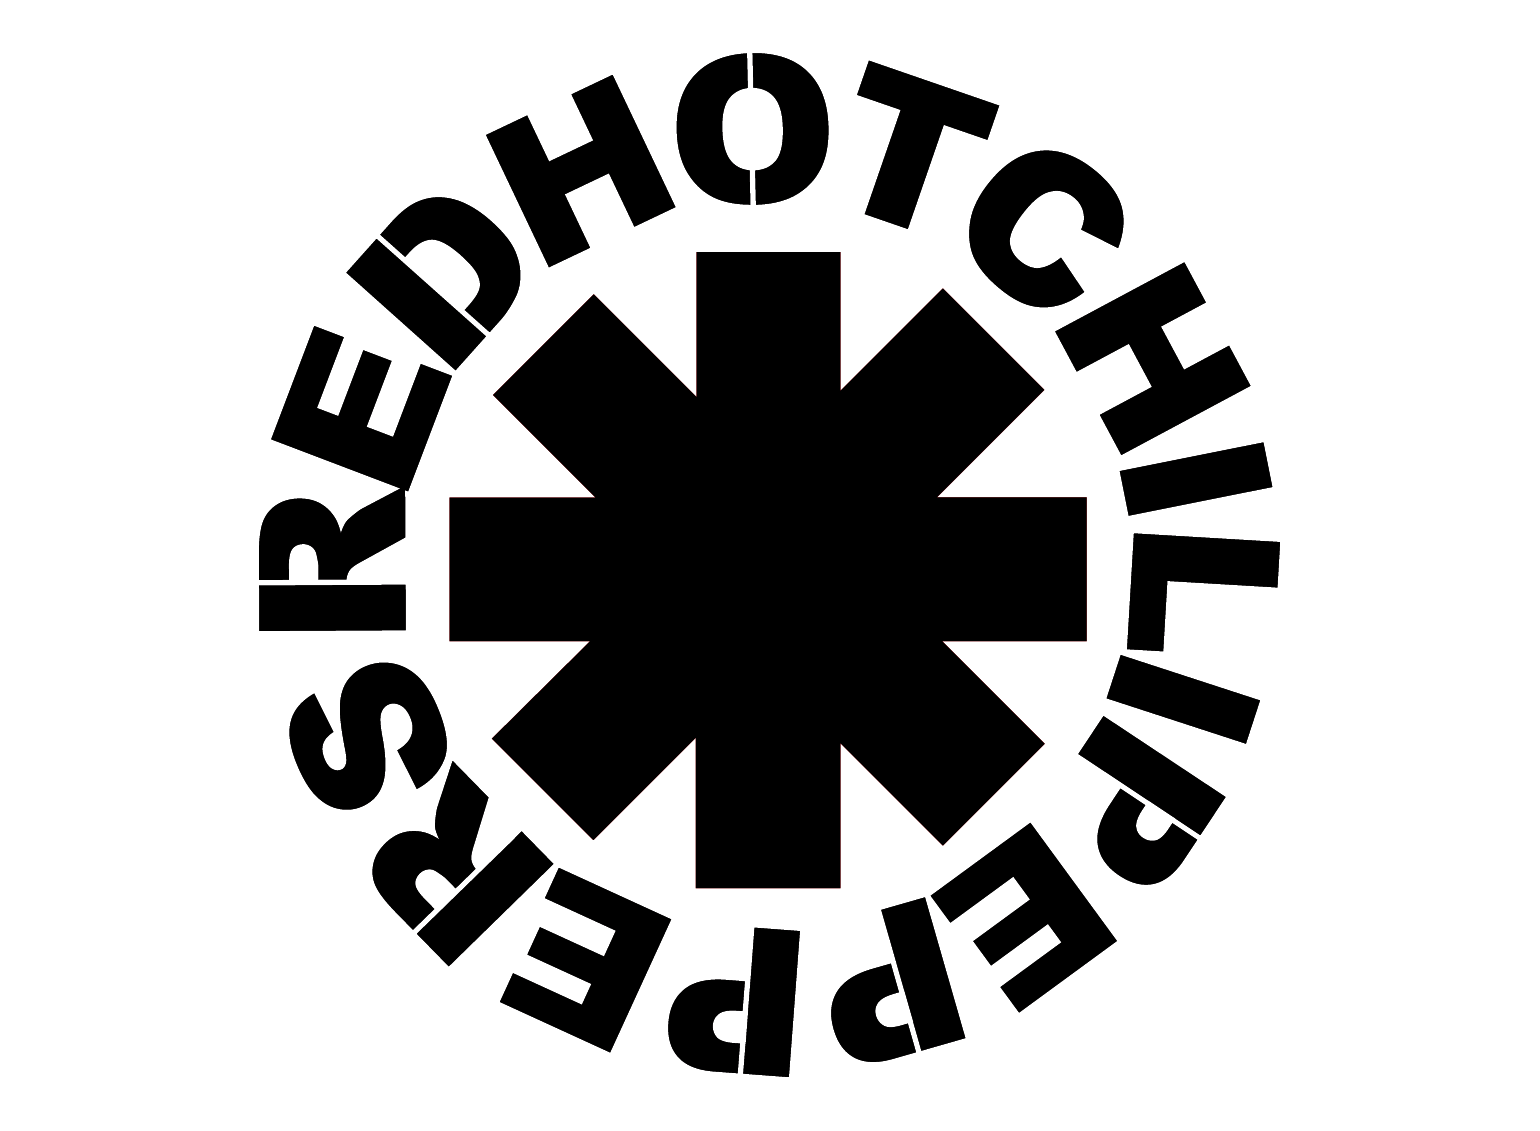 Red Hot Chili Peppers Logo - Font Red Hot Chili Peppers Logo | All logos world | Pinterest ...